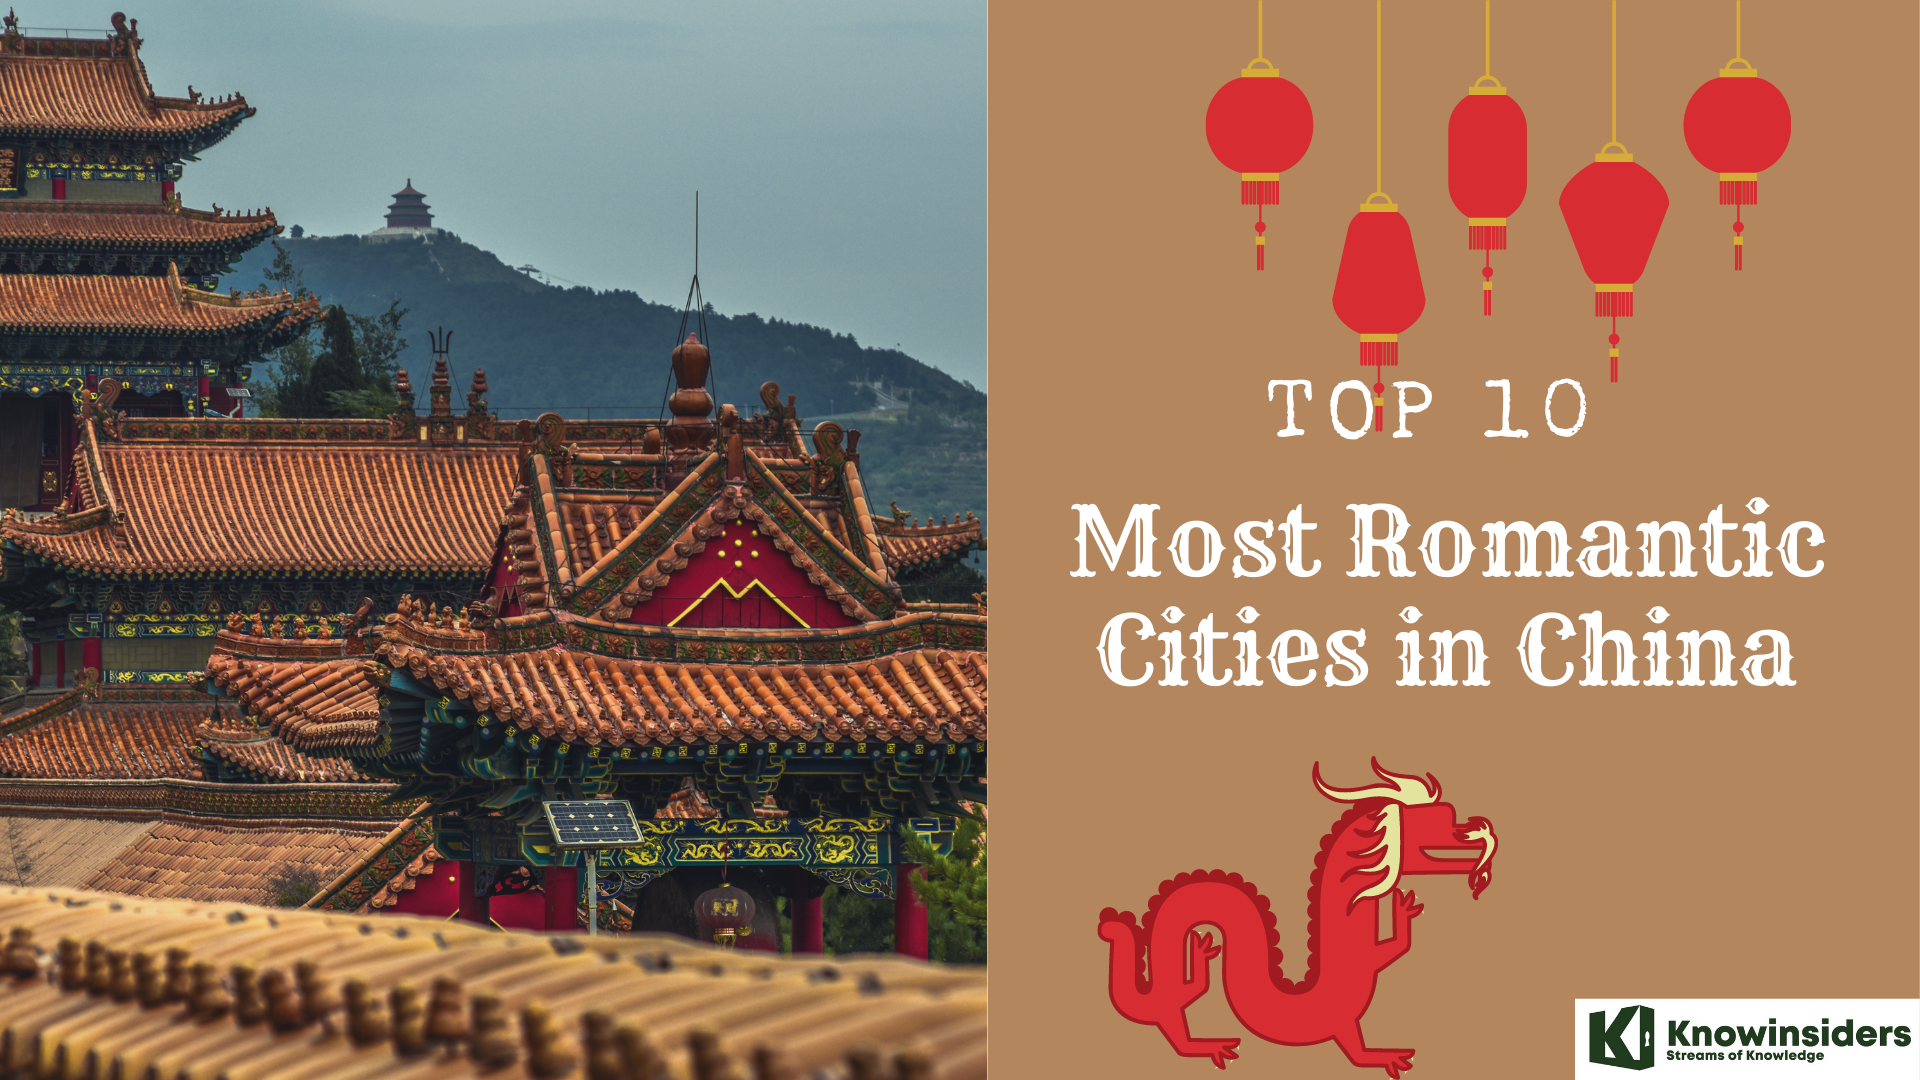 Top 10 Most Romantic Cities in China